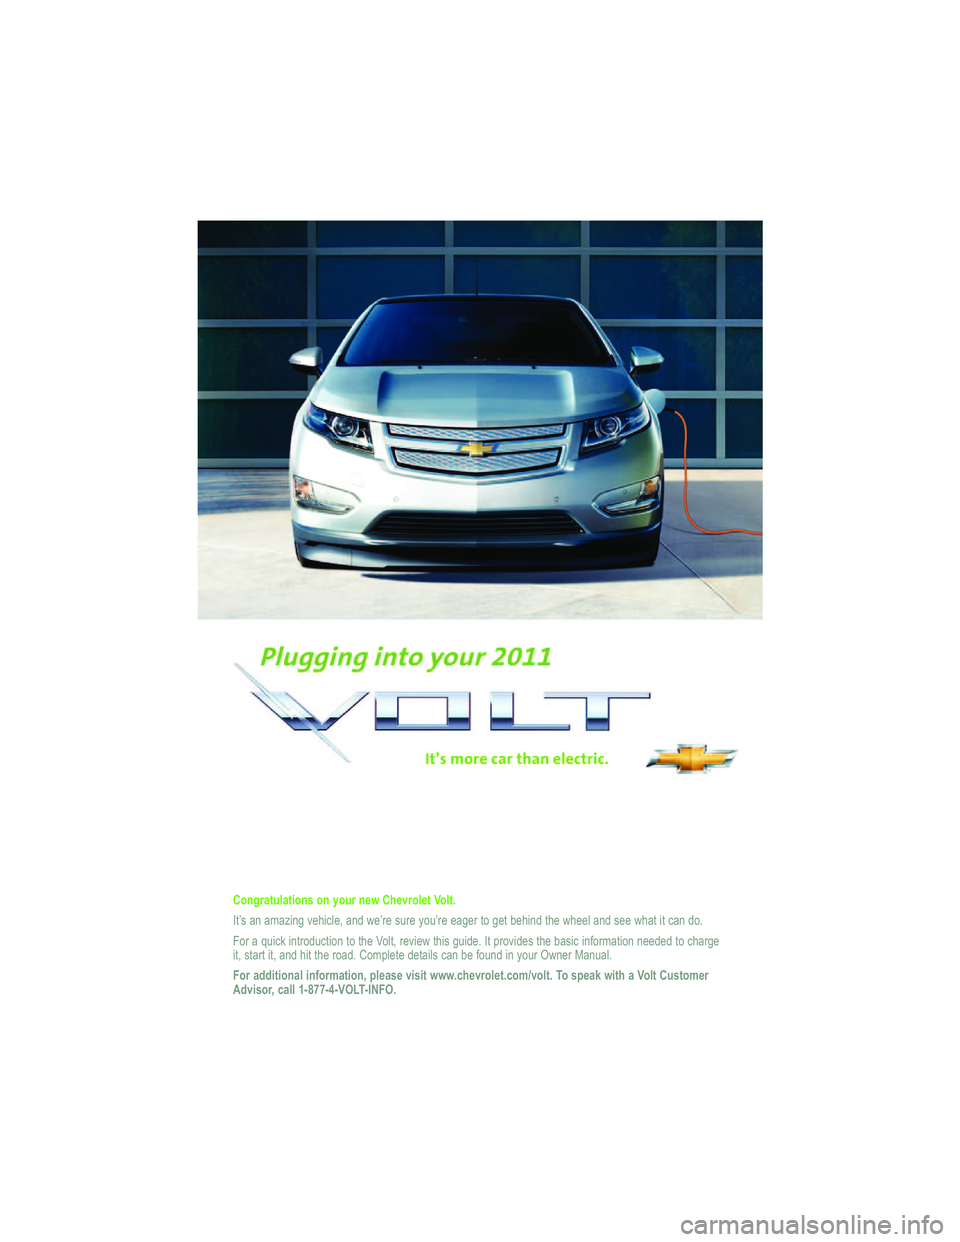 CHEVROLET VOLT 2011  Get To Know Guide 65.8( :; 3( :06 59 6 5 ? 6 ;8 5 ,=   /,<86 3, : % 6 3: 
@K?  - : - 9 -F5: 3 B 1 45/ 81   - : 0 C 1K> 1  ? A >1  E ; AK> 1  1 -31> @;  3 1@  . 145: 0 @4 1 C 4118  - :0 ? 1 1 C 4-@  5@   / - :  0 ;